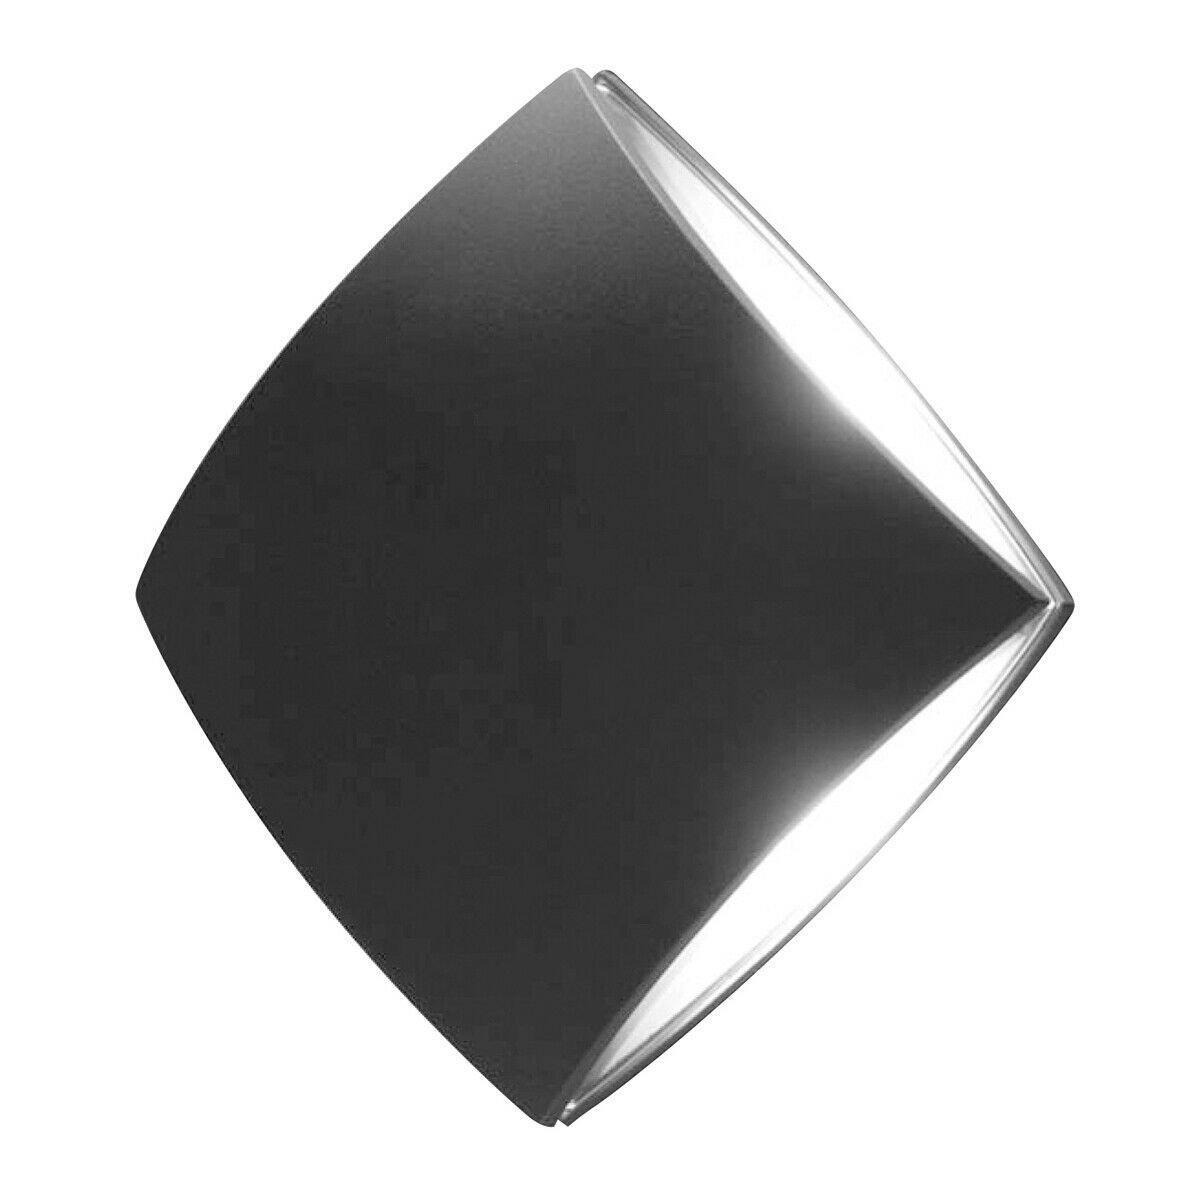 Outdoor IP54 Wall Light Sconce Graphite Finish LED 11W Bulb Outside External - image 1